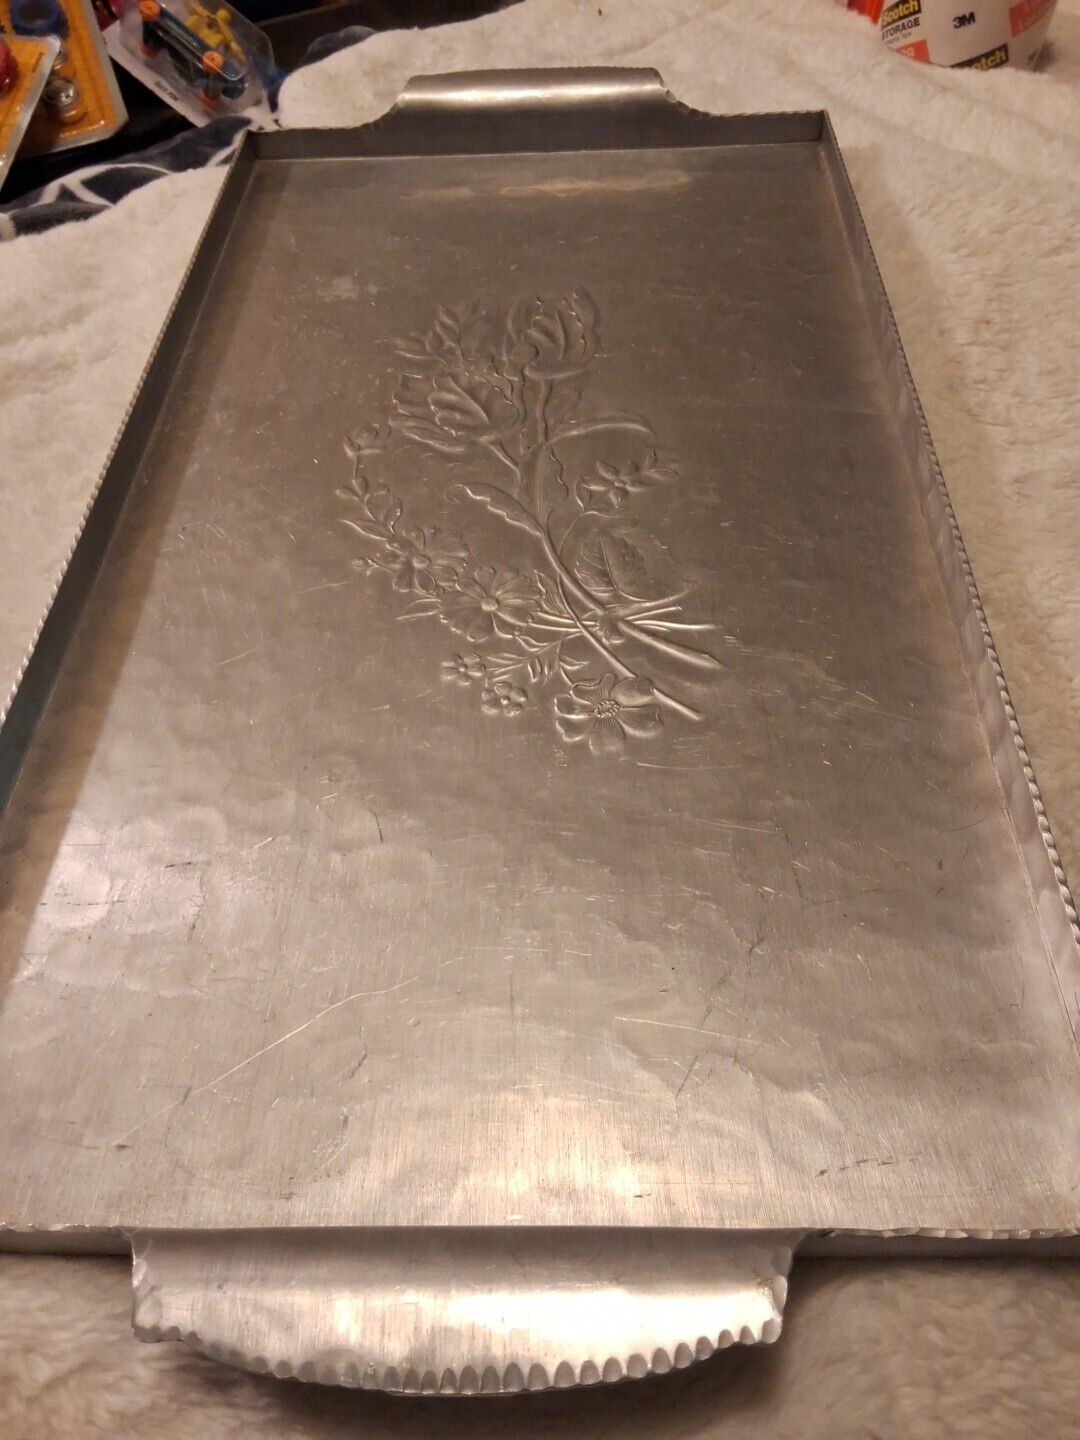 Hand Forged Everlast Metal Floral Themed Tray w Handles 